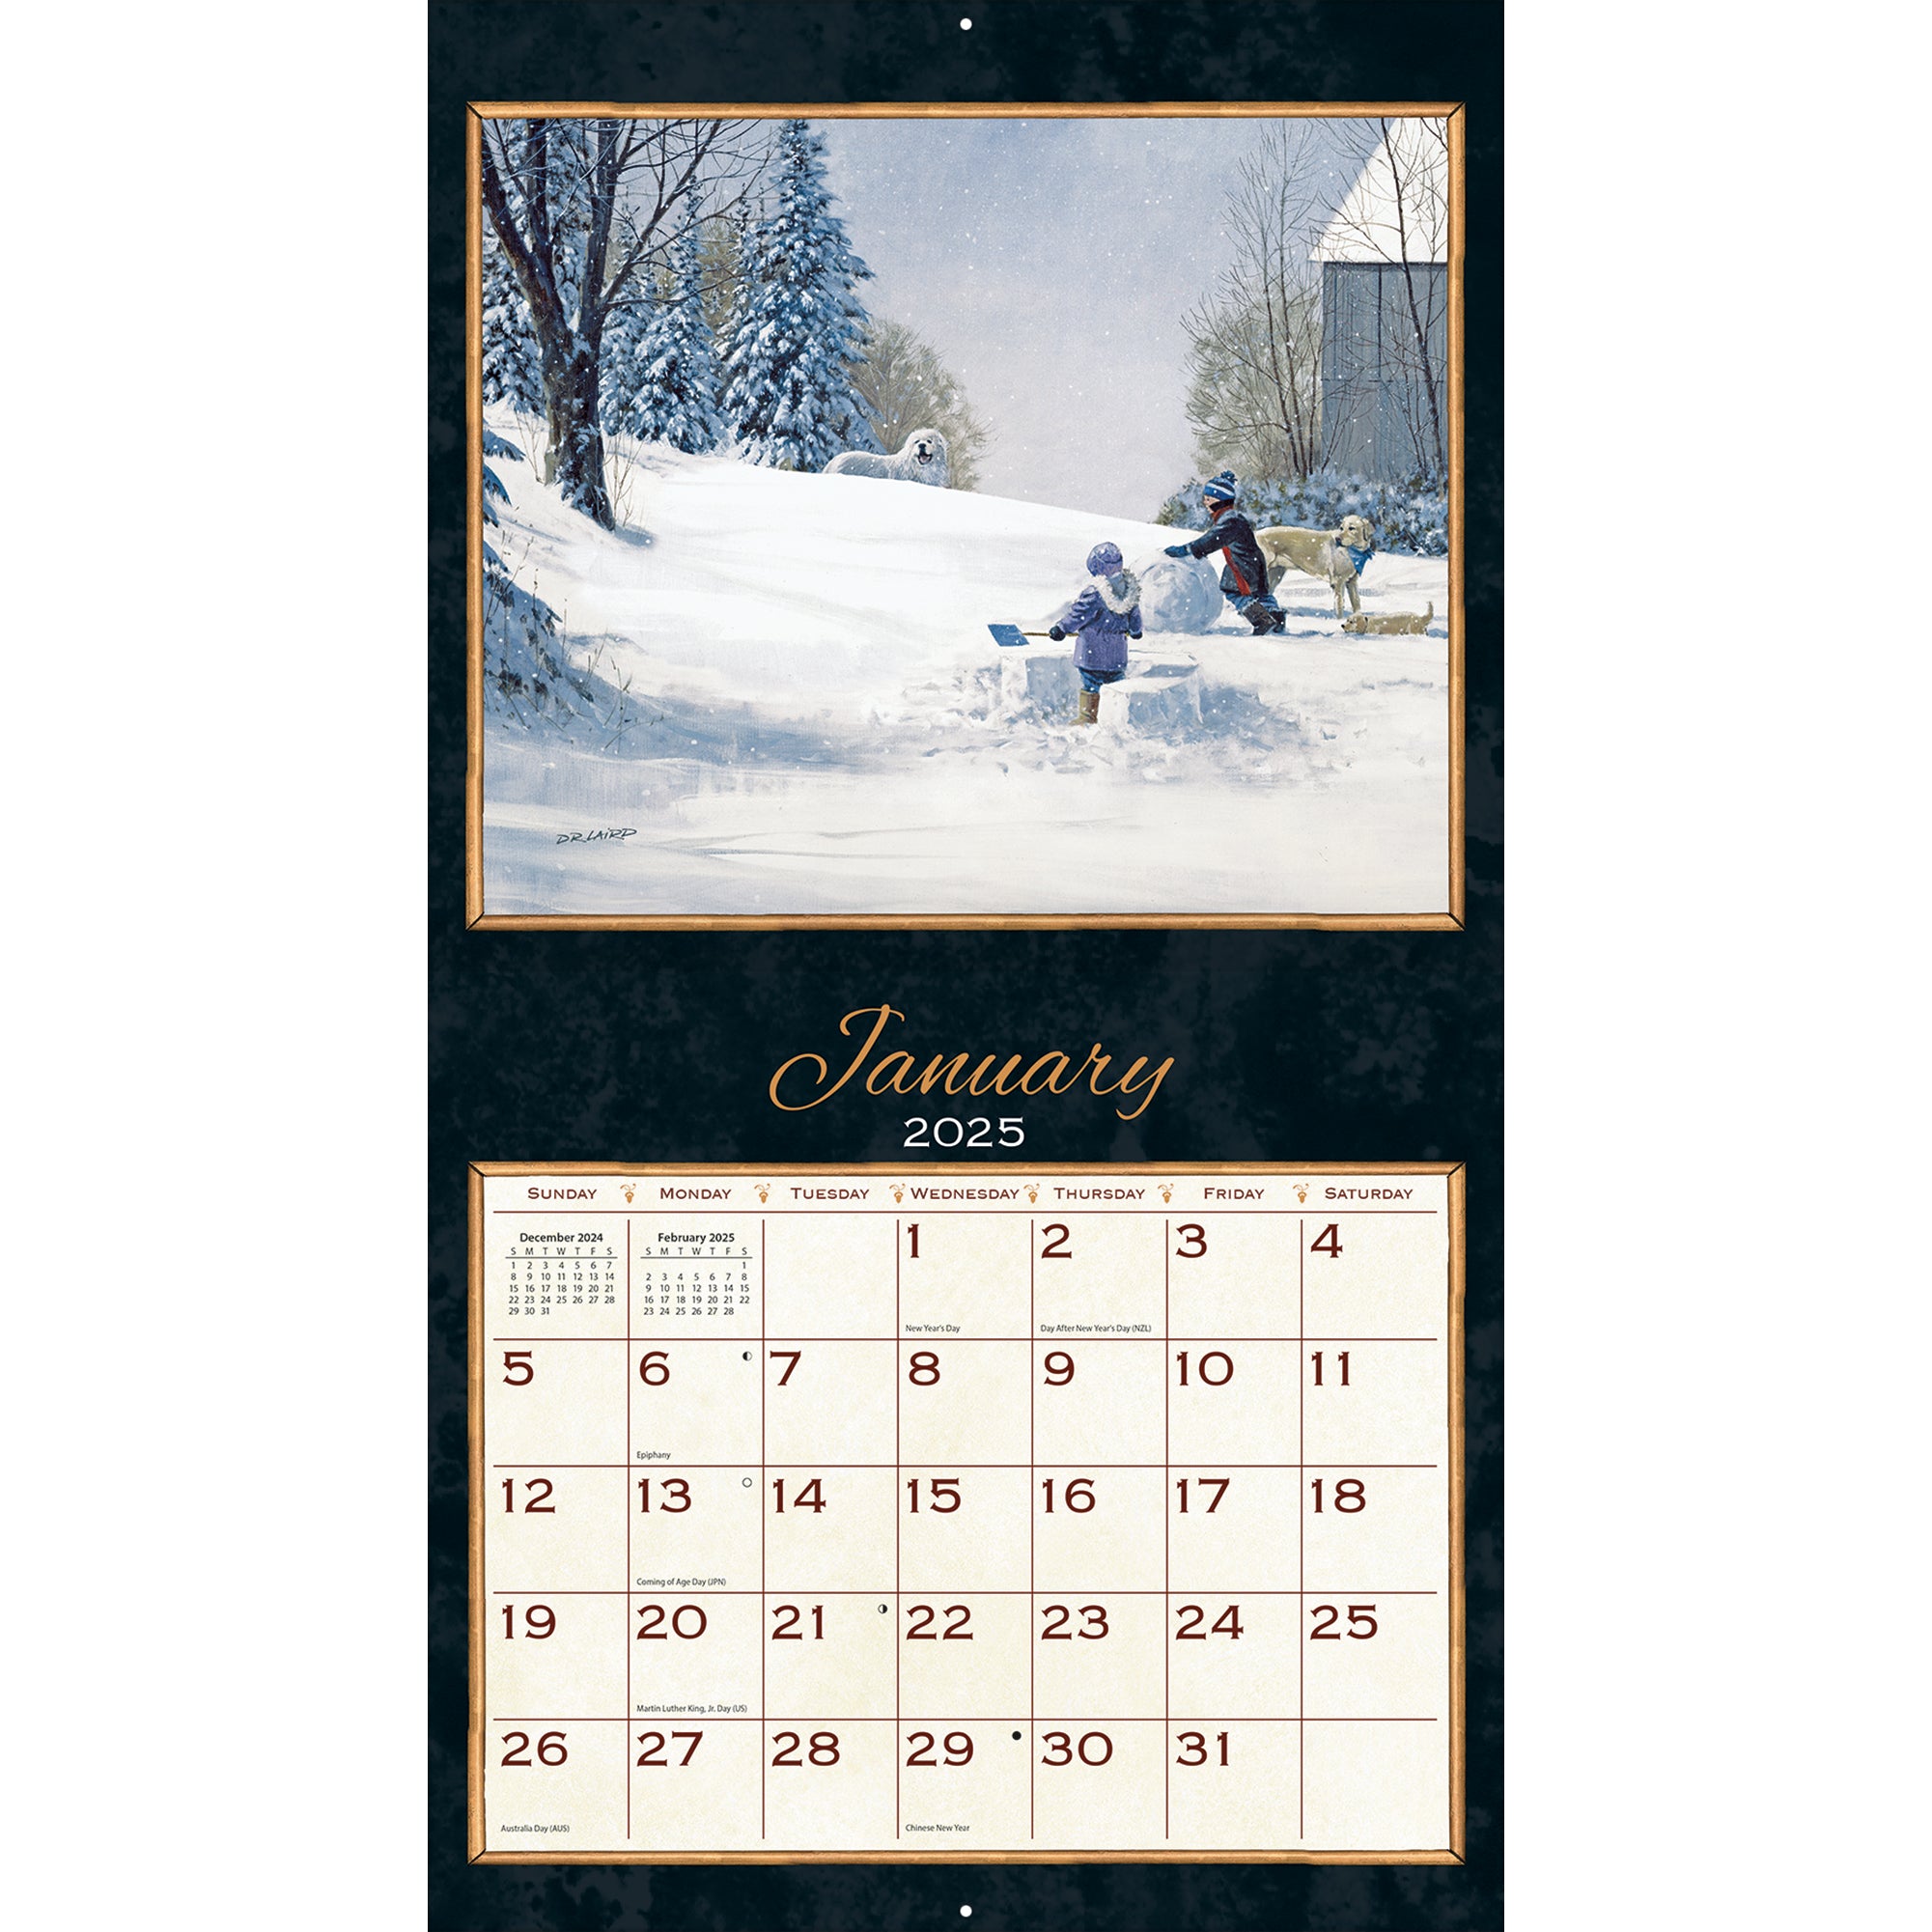 2025 Treasured Times By D.R. Laird - LANG Deluxe Wall Calendar